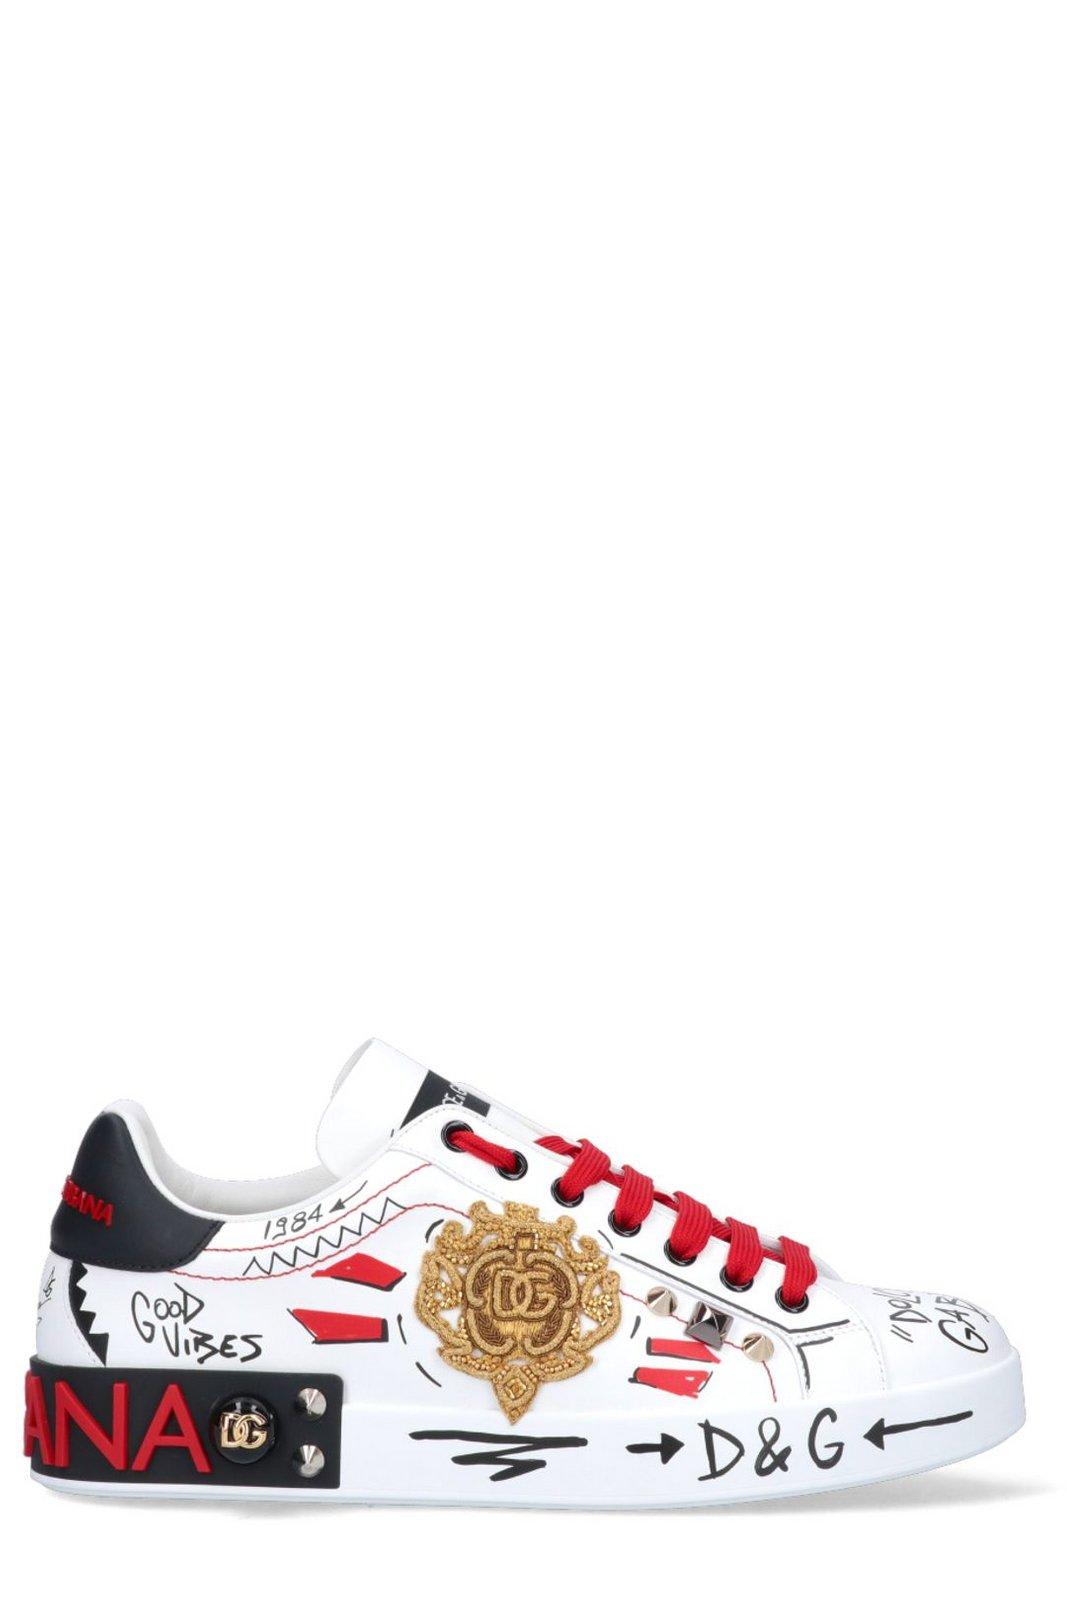 DOLCE & GABBANA ROUND TOE LACE-UP SNEAKERS